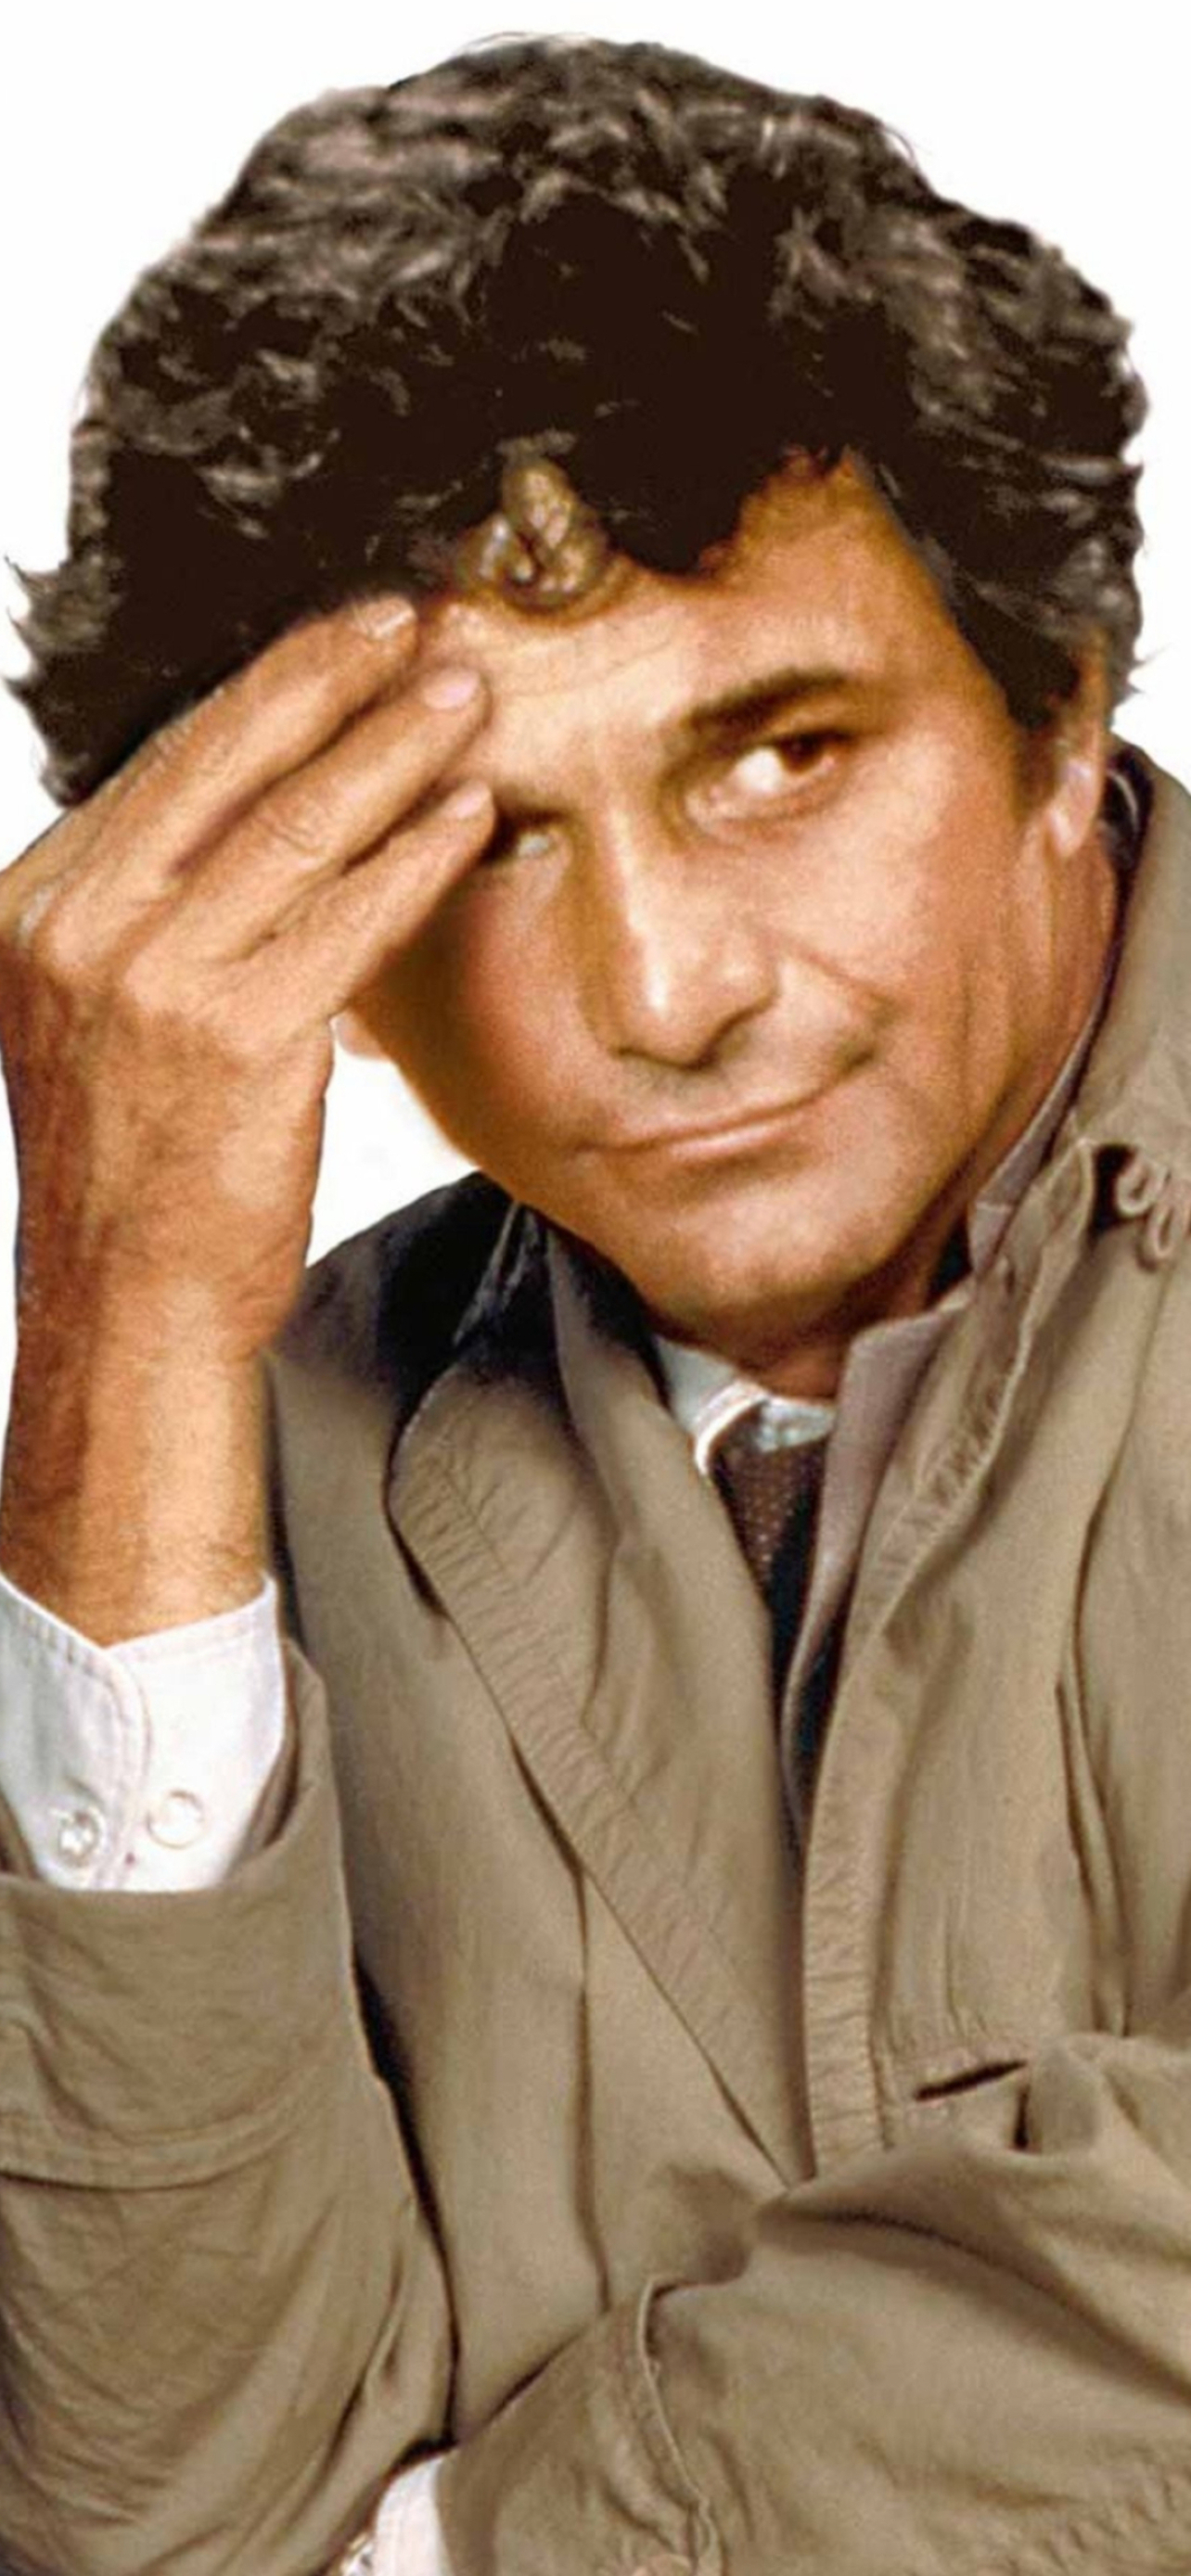 Columbo (Movie): Oscar Nominee Peter Falk, The series composed of 69 TV-movies, Police detective. 1290x2780 HD Background.